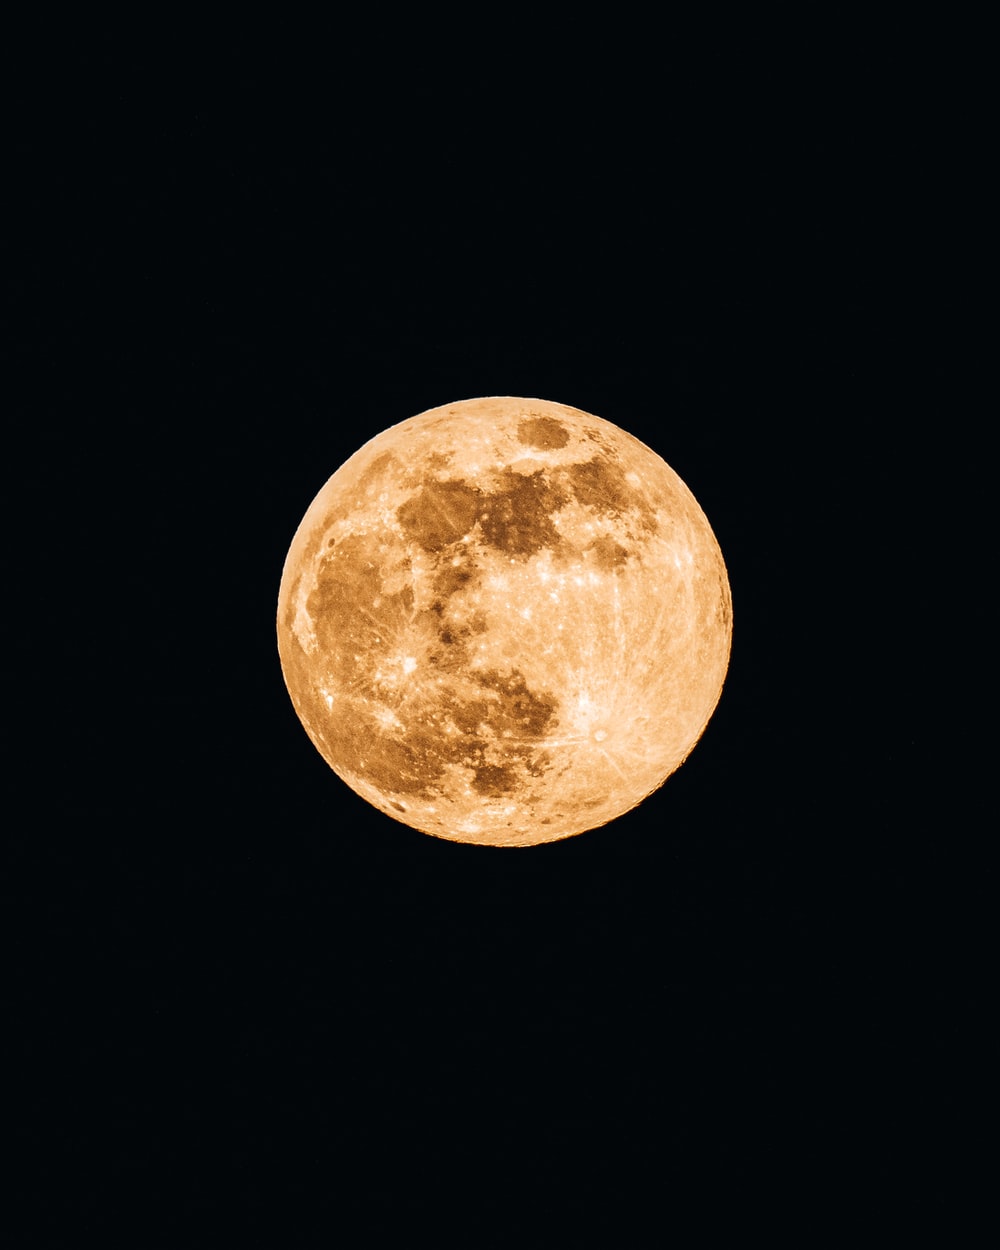 Bright Moon Picture. Download Free Image